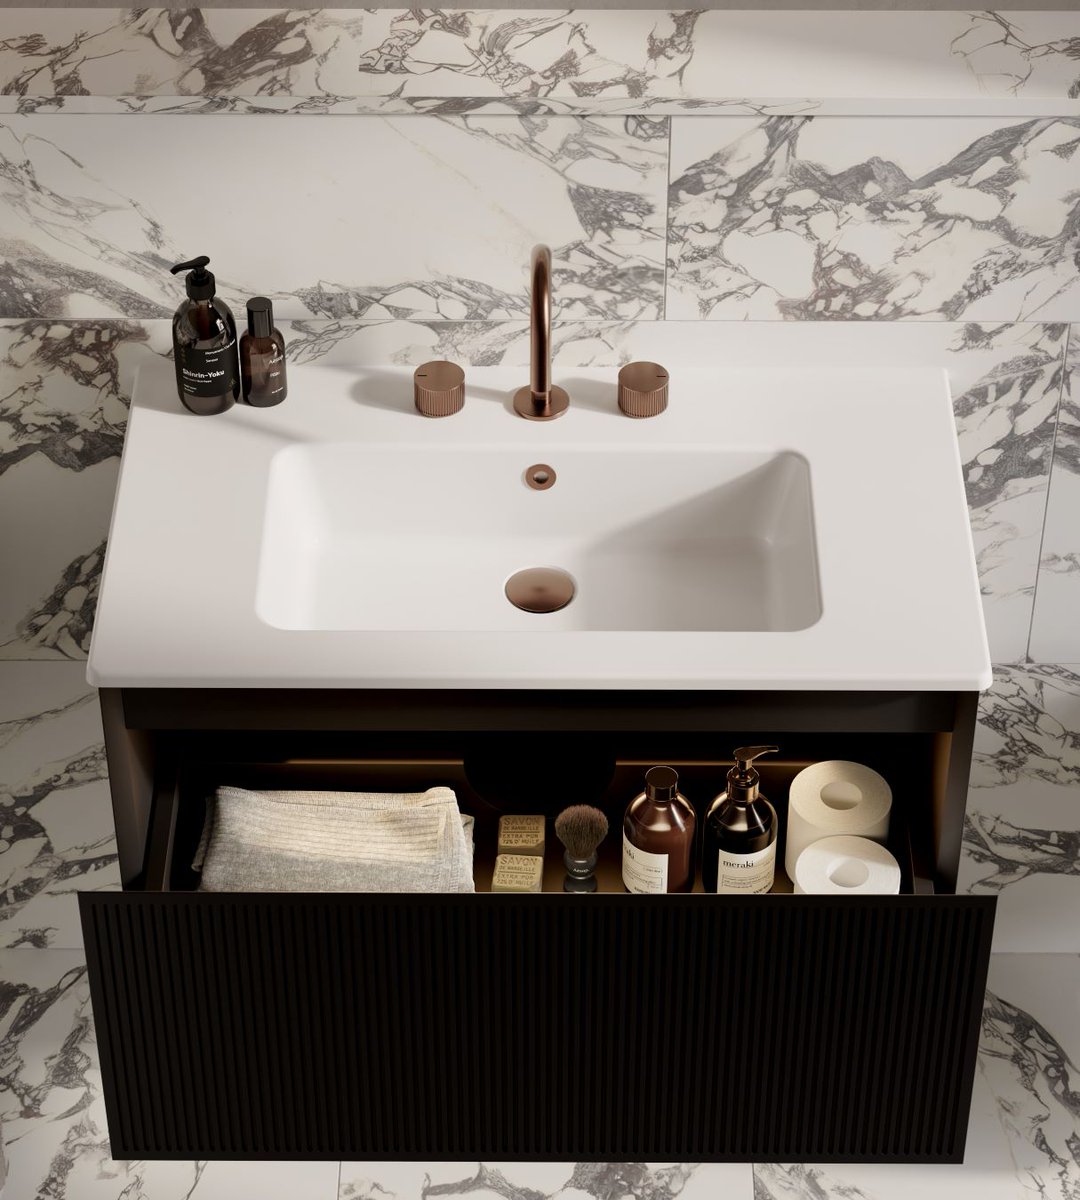 Monument just expanded. ICONIC ARCHITECTURE INSPIRED FURNITURE🏛️ With a torrent of requests for more options, the inaugural wave of expansion is here. #newproducts #saneux #bathroomforlife #design #bathroomdesign